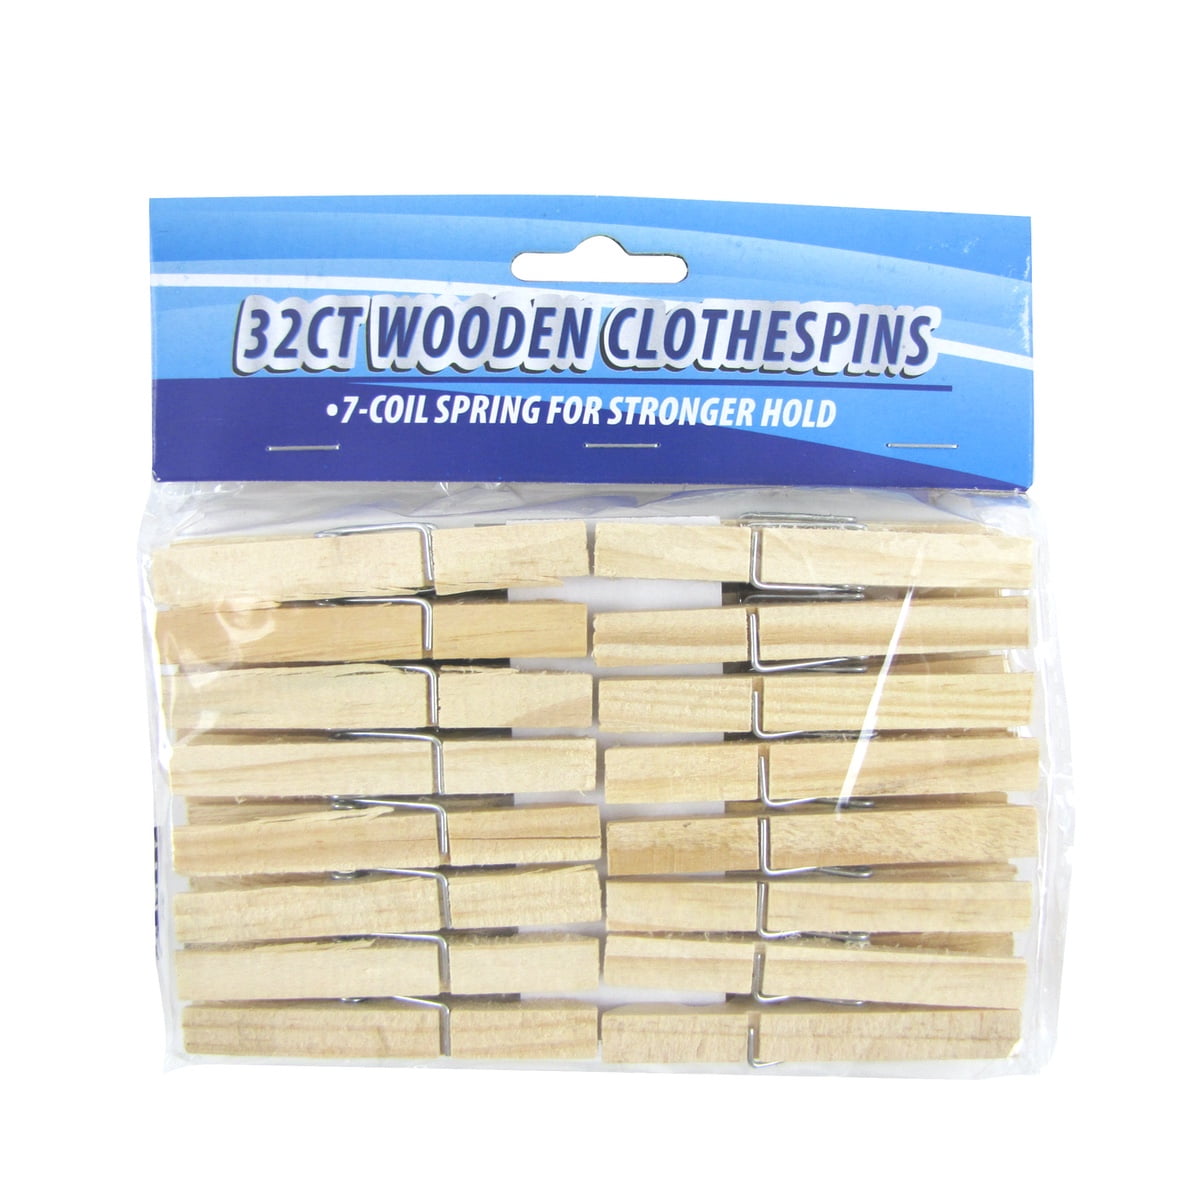 AllTopBargains 40 Pcs Wood Clothespins with Spring 2 7/8 Large Heavy Duty Clothes Pins Crafts